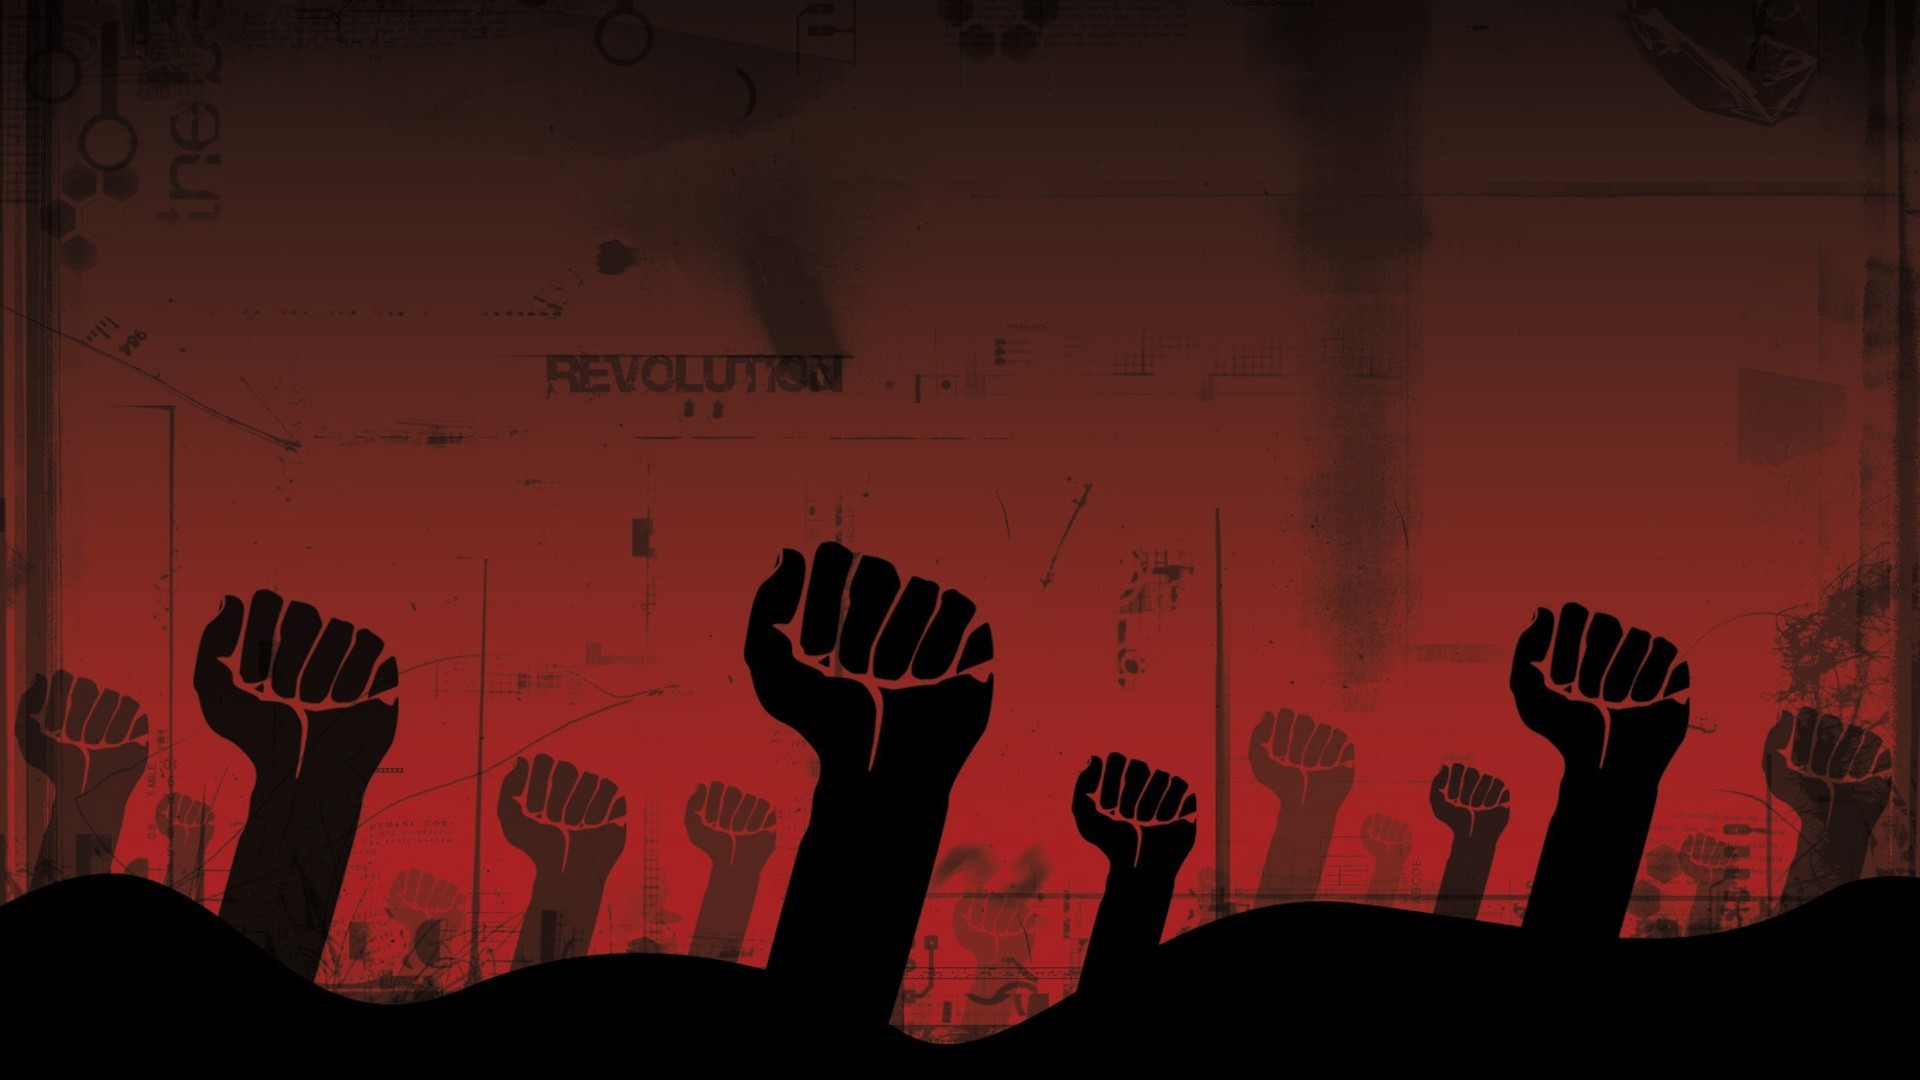 General 1920x1080 revolution  fist artwork arms up red background red digital art simple background text